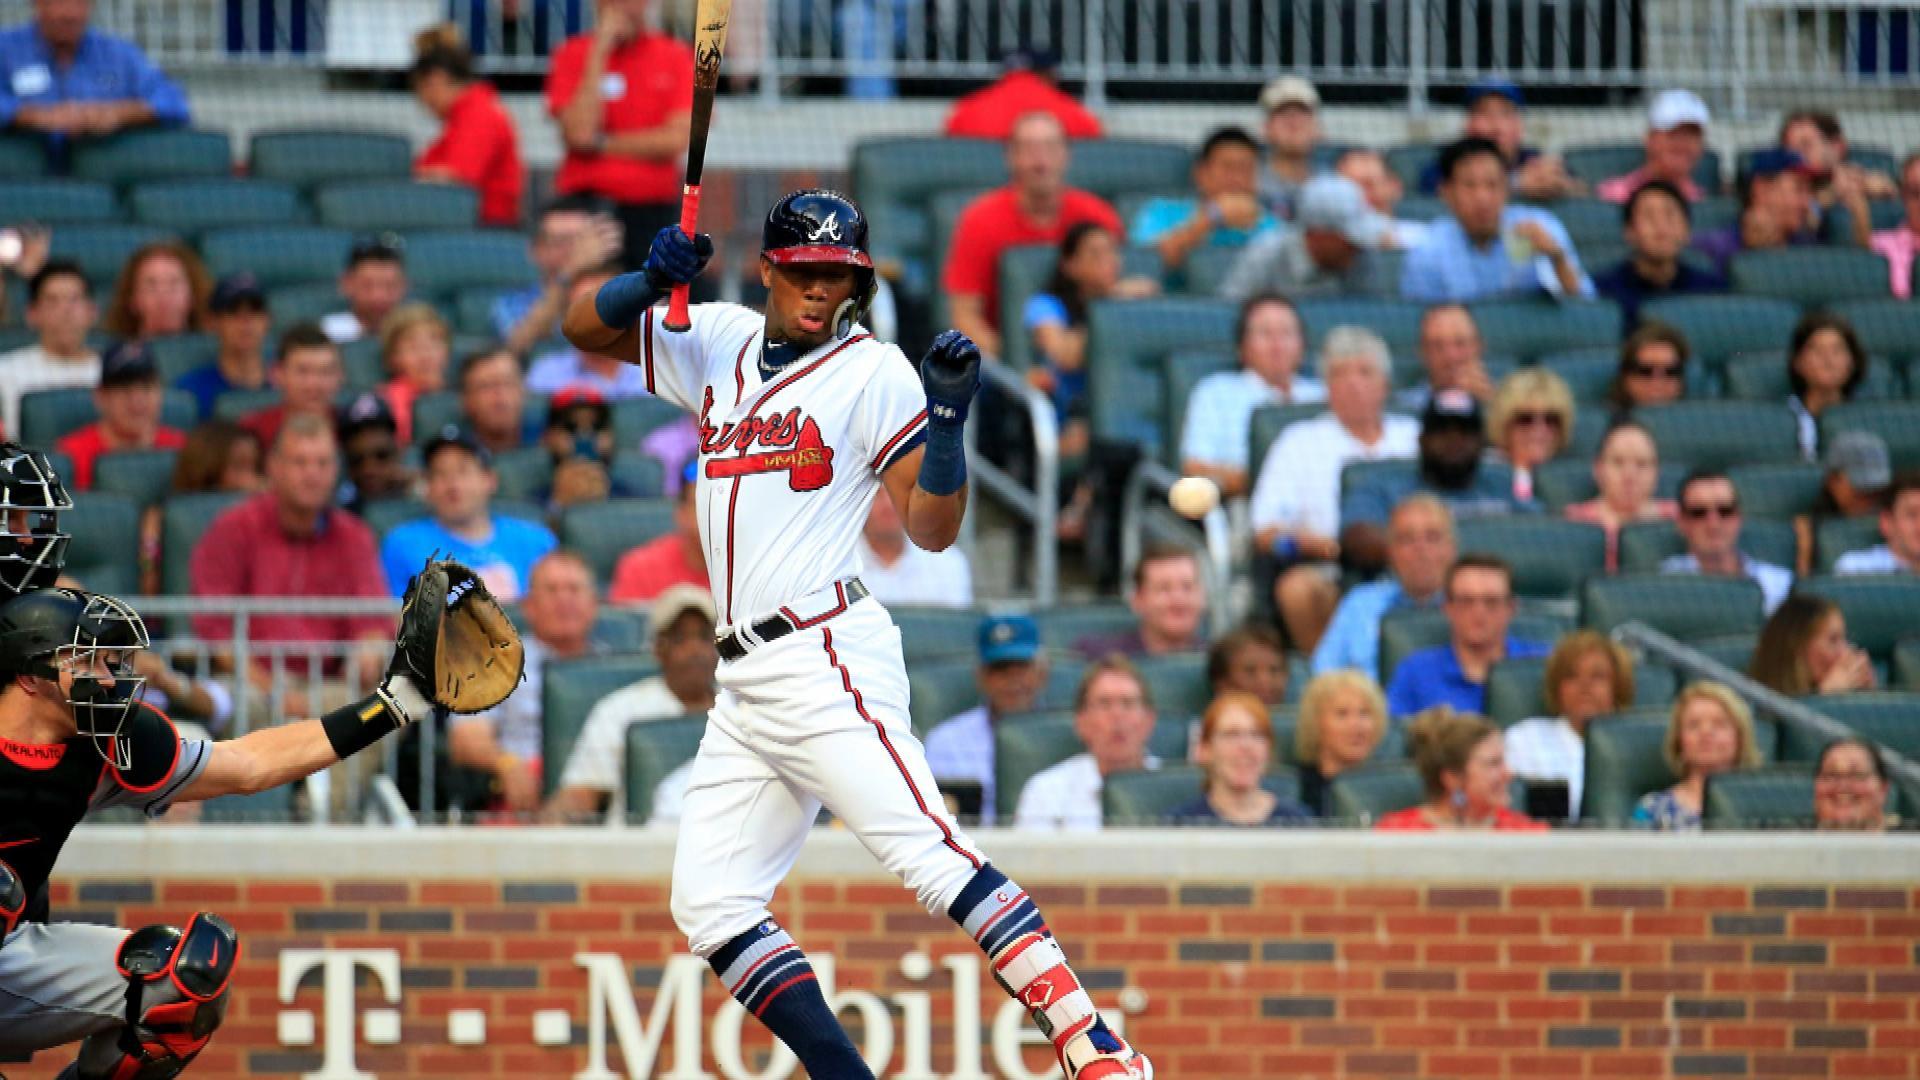 Al Leiter admits Jose Urena throwing at Ronald Acuna looked